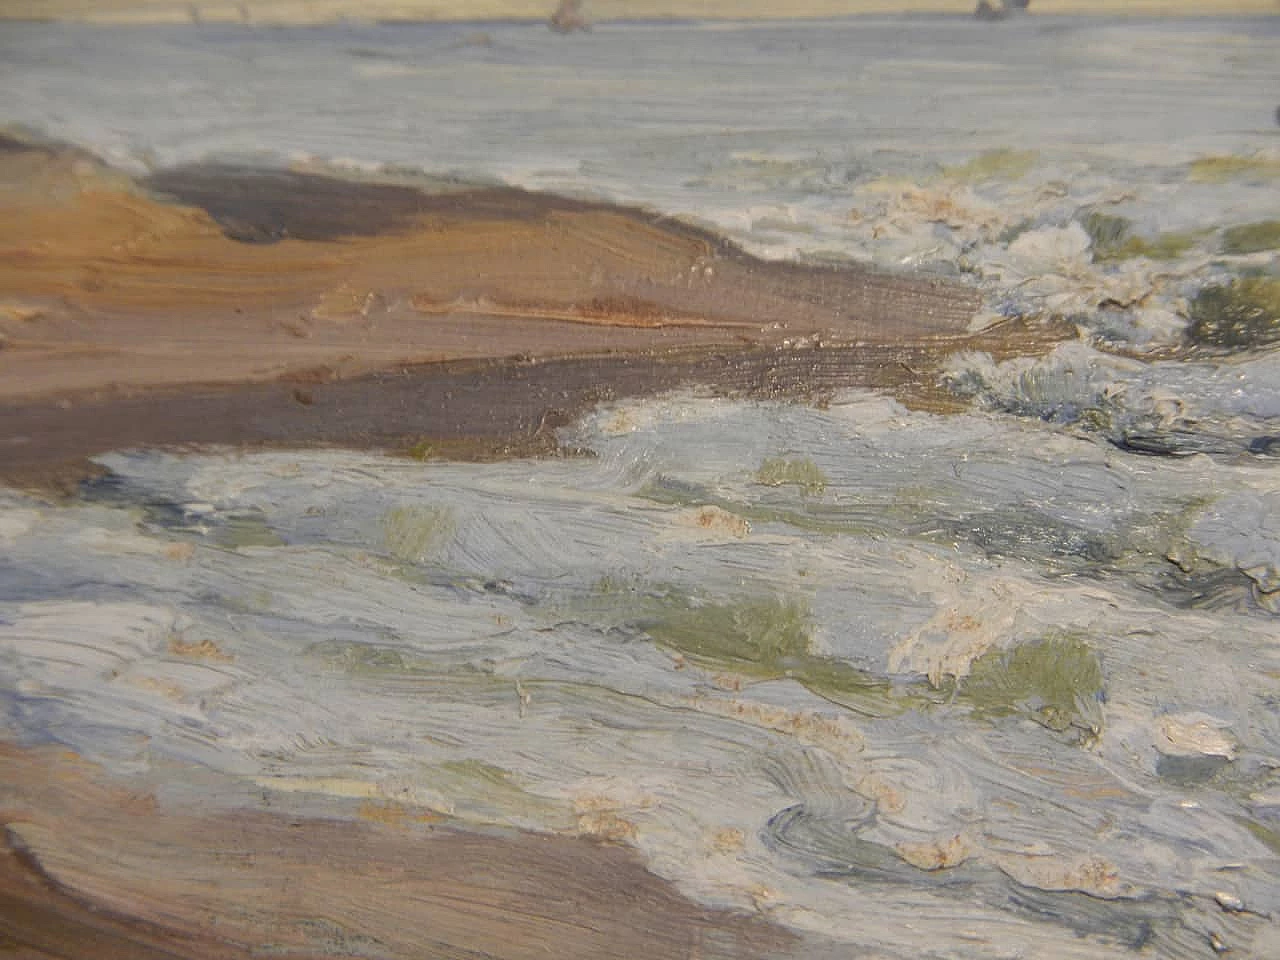 Des Champs, ocean, painting on wood, early 20th century 4